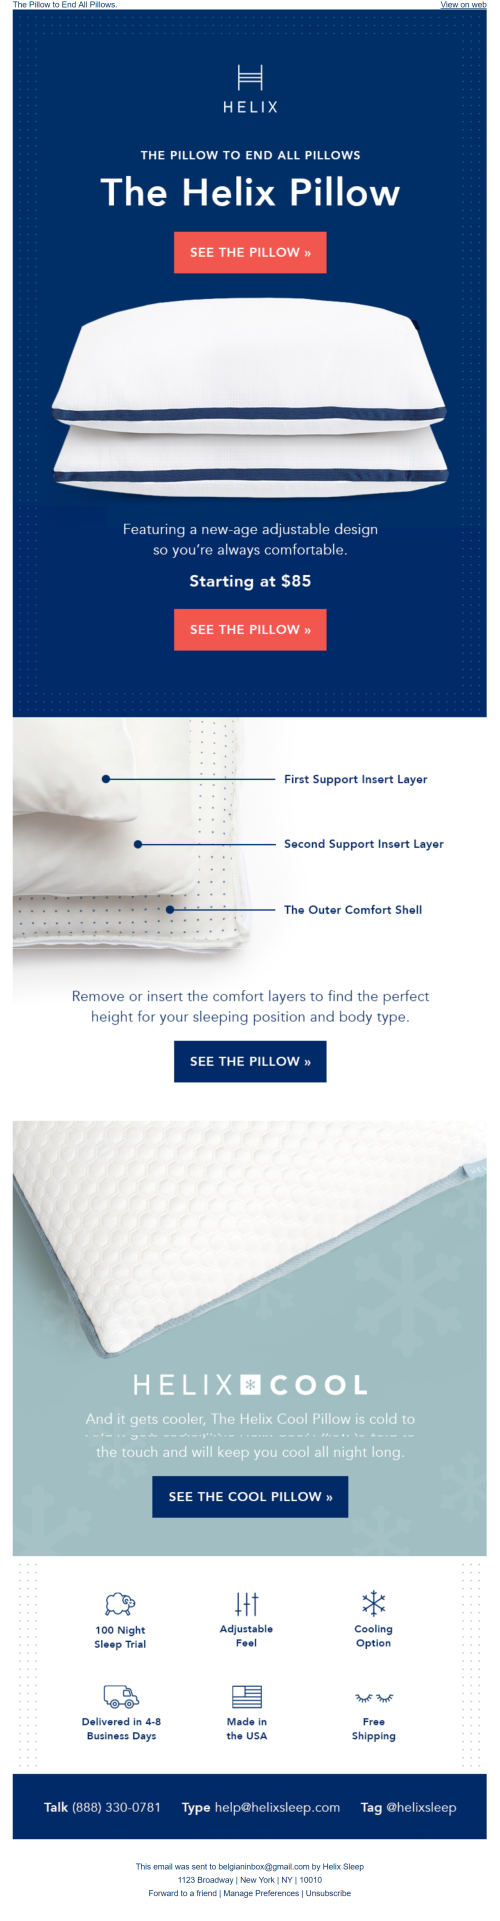 Product launch email - Pillow